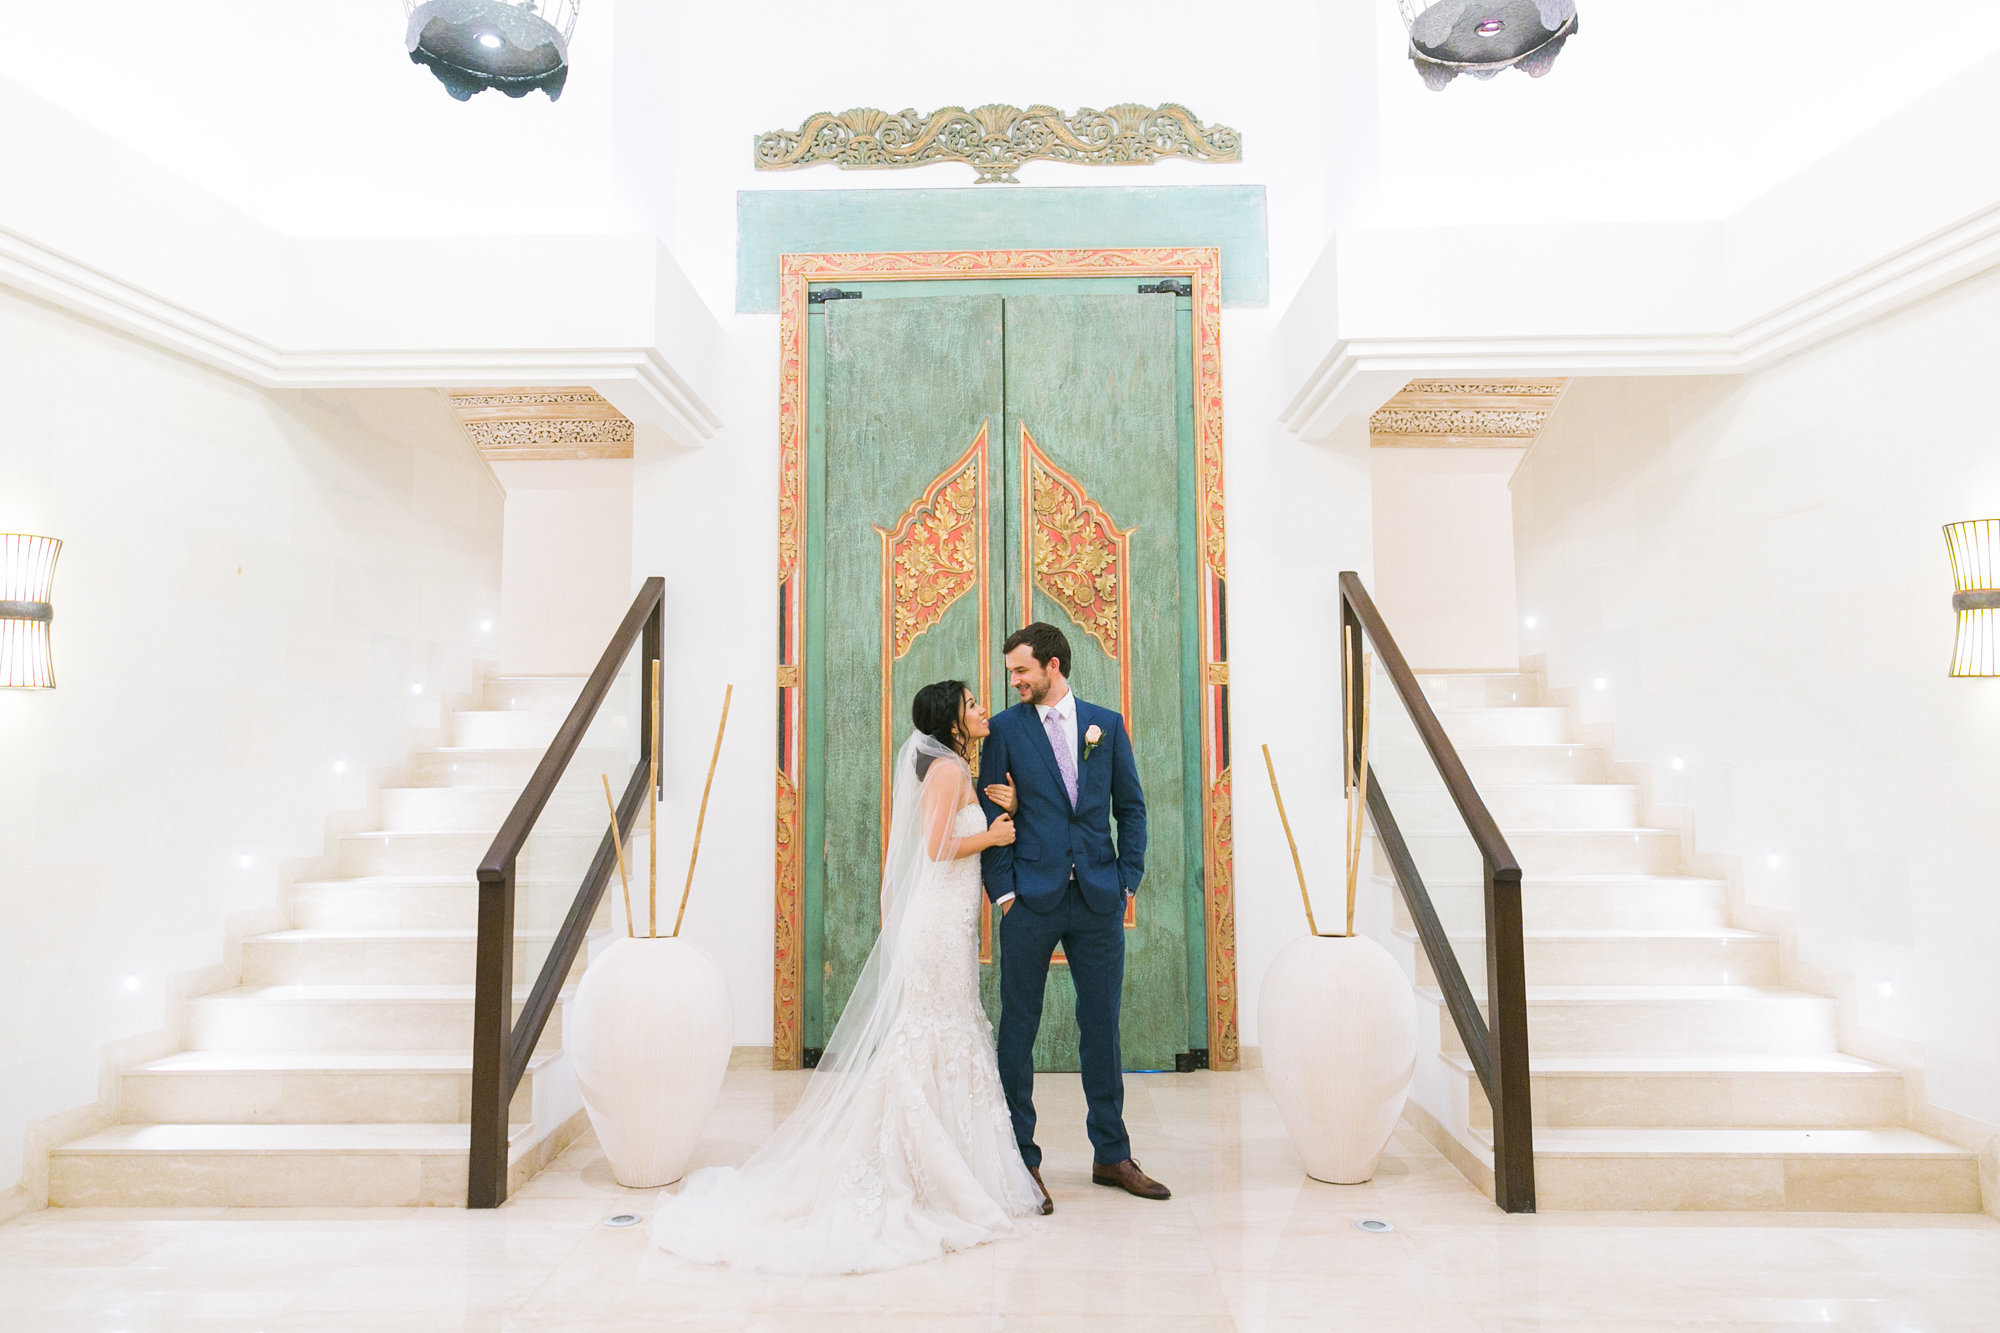 Newlyweds gaze at each other in foyer